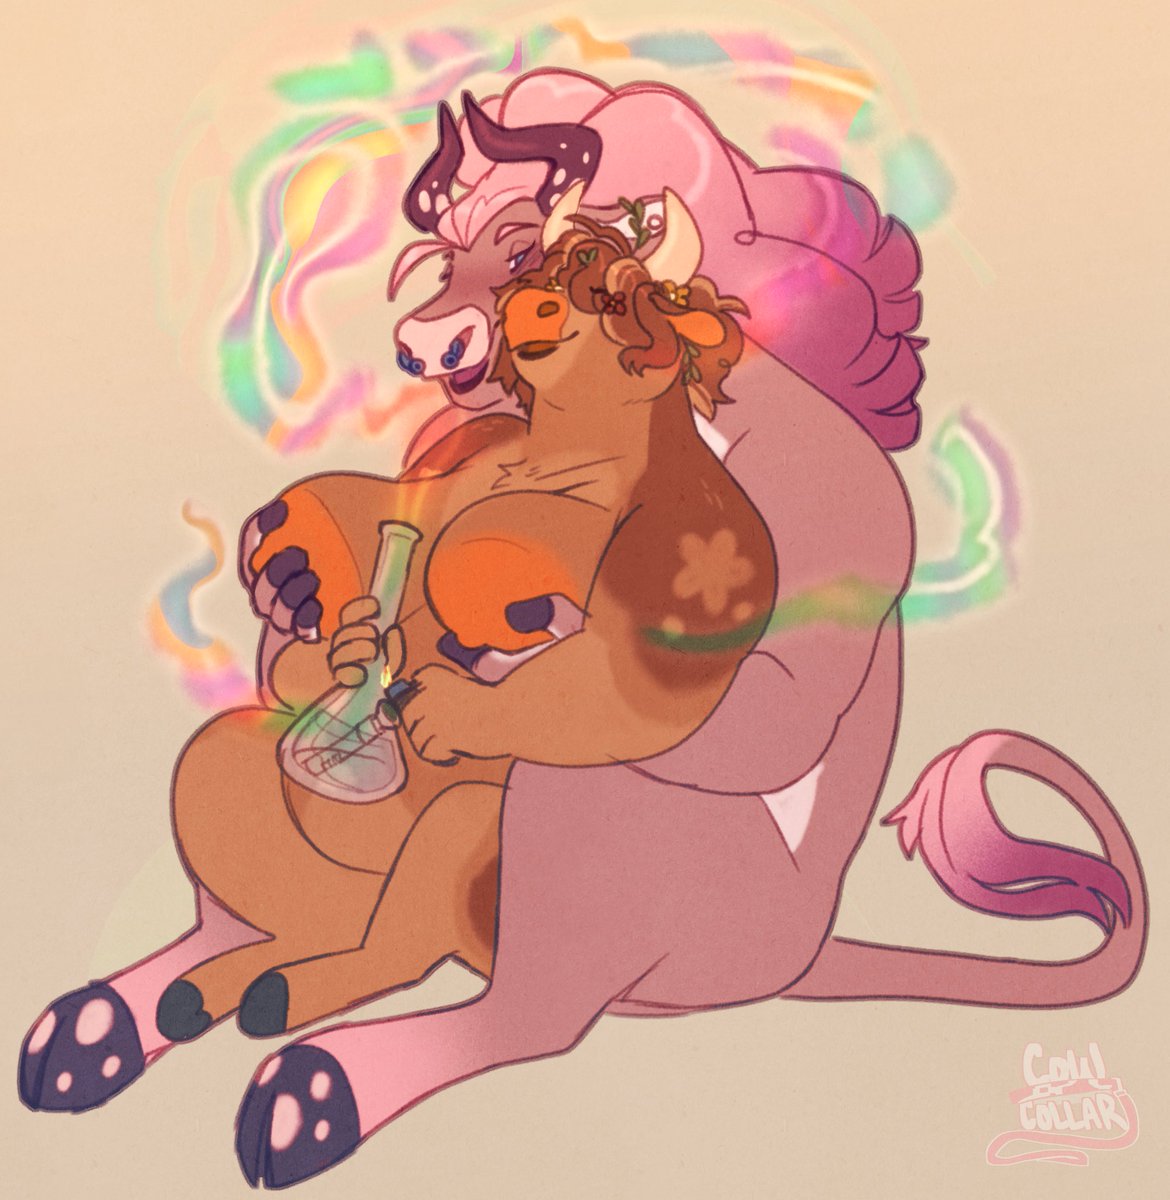 [ weed ] share a hit with me? 💕 lovely lovey commission for @LewdMamaMoo and @nsfleggy <3